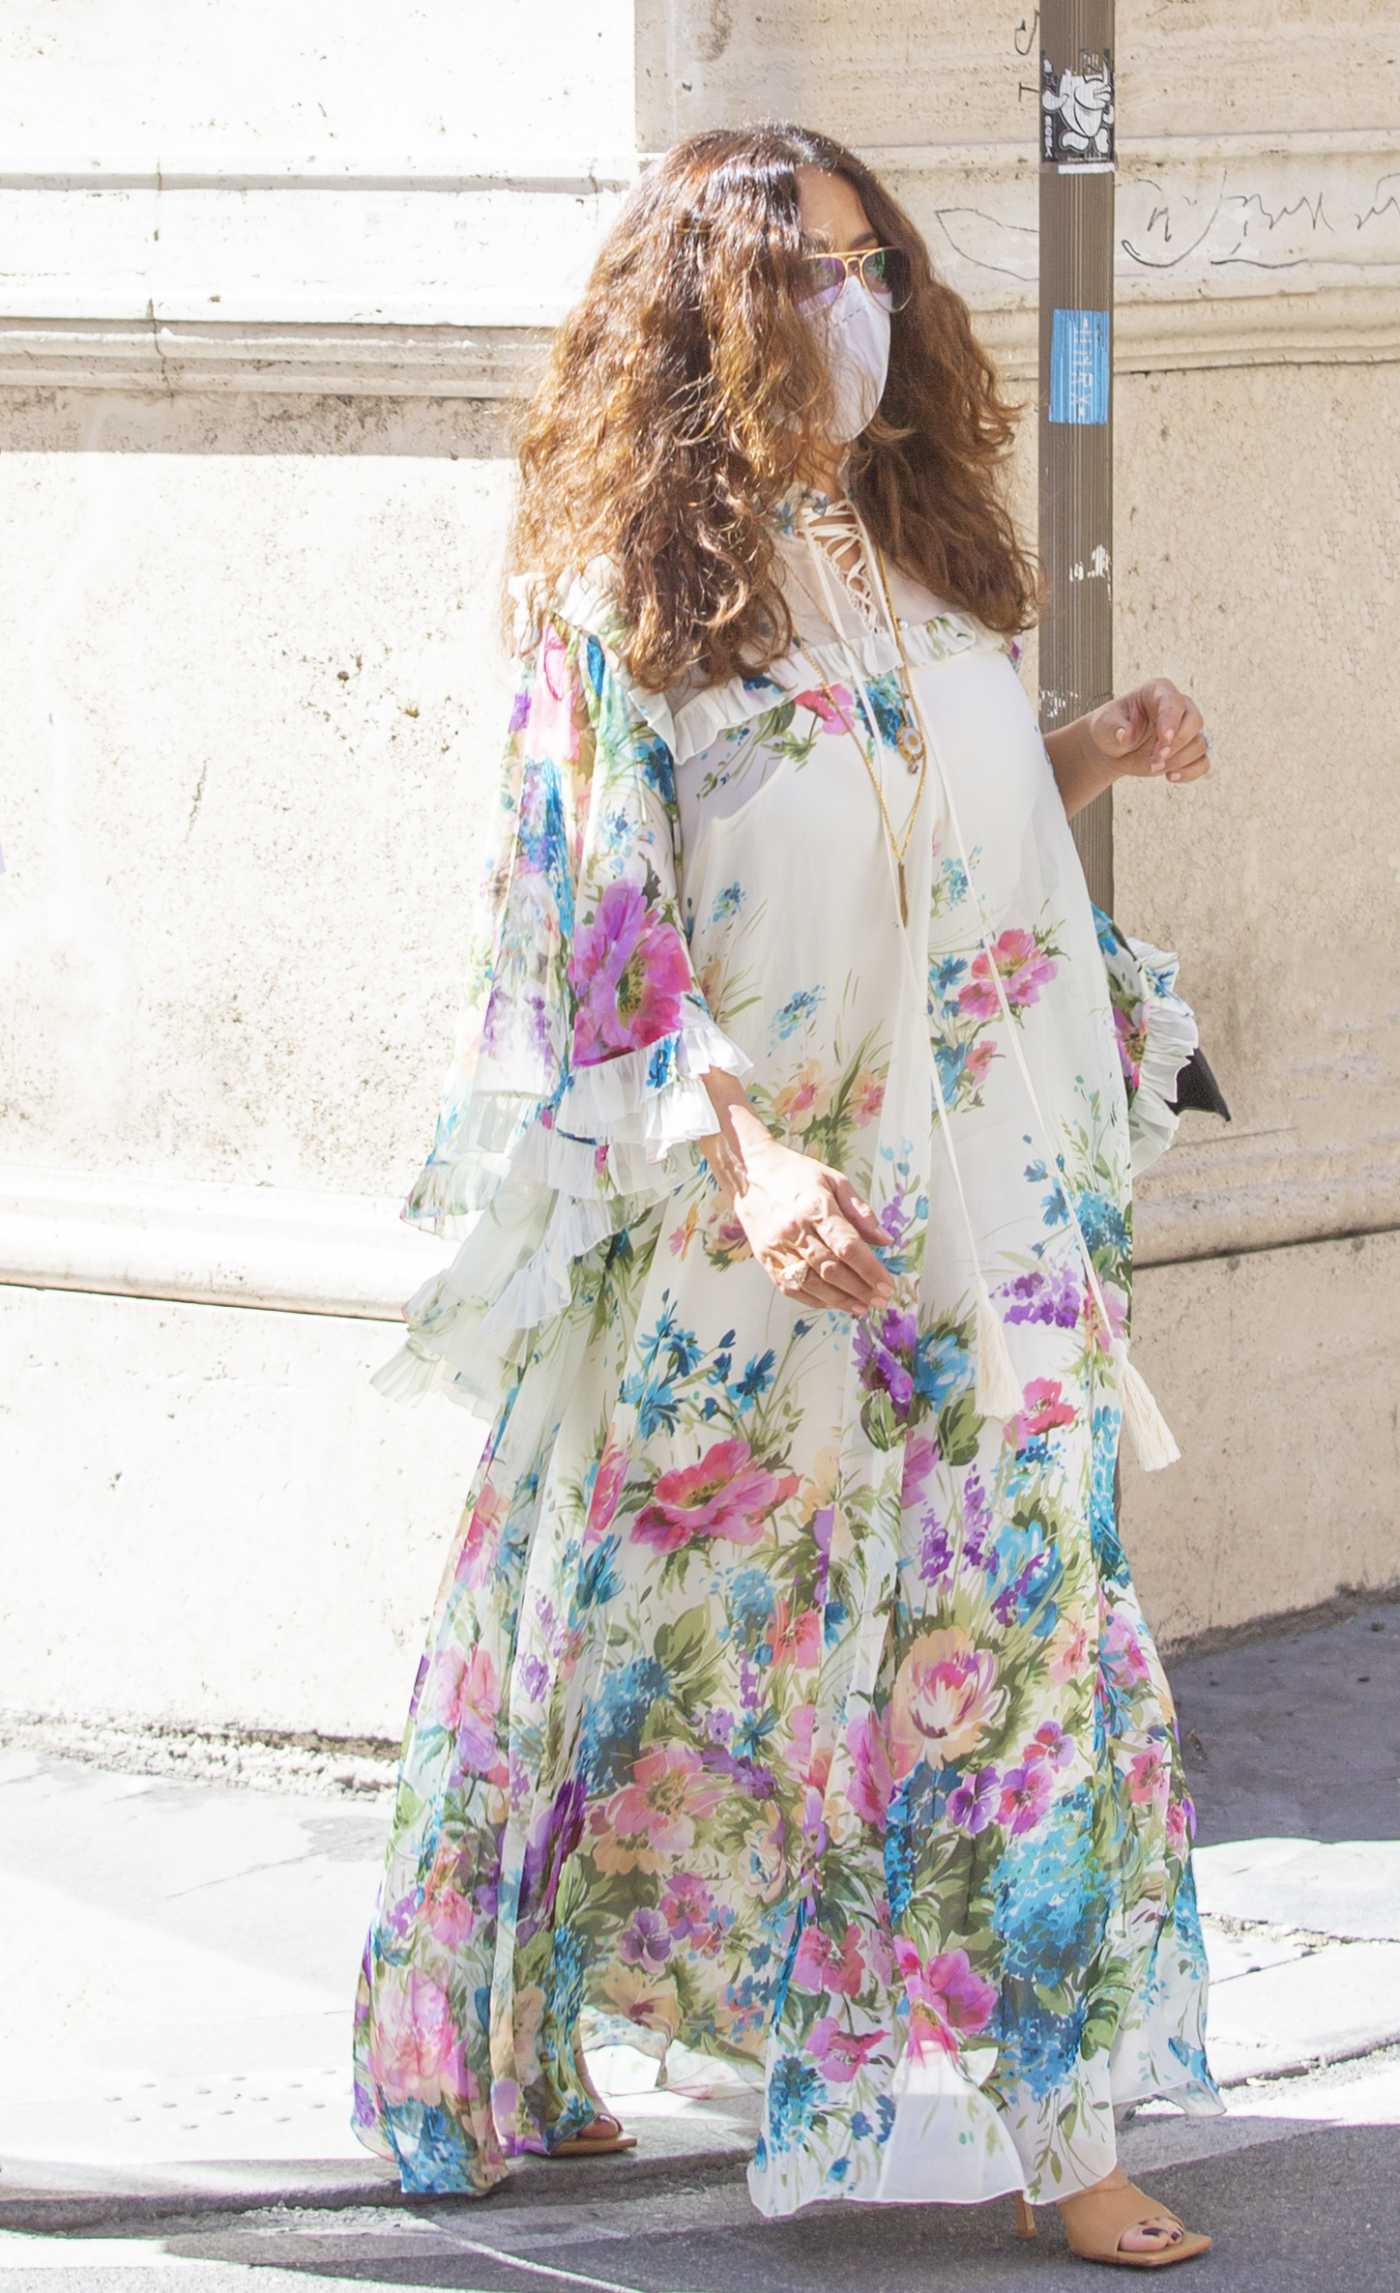 Salma Hayek in a Floral Dress Was Seen Out in Rome 04/02/2021